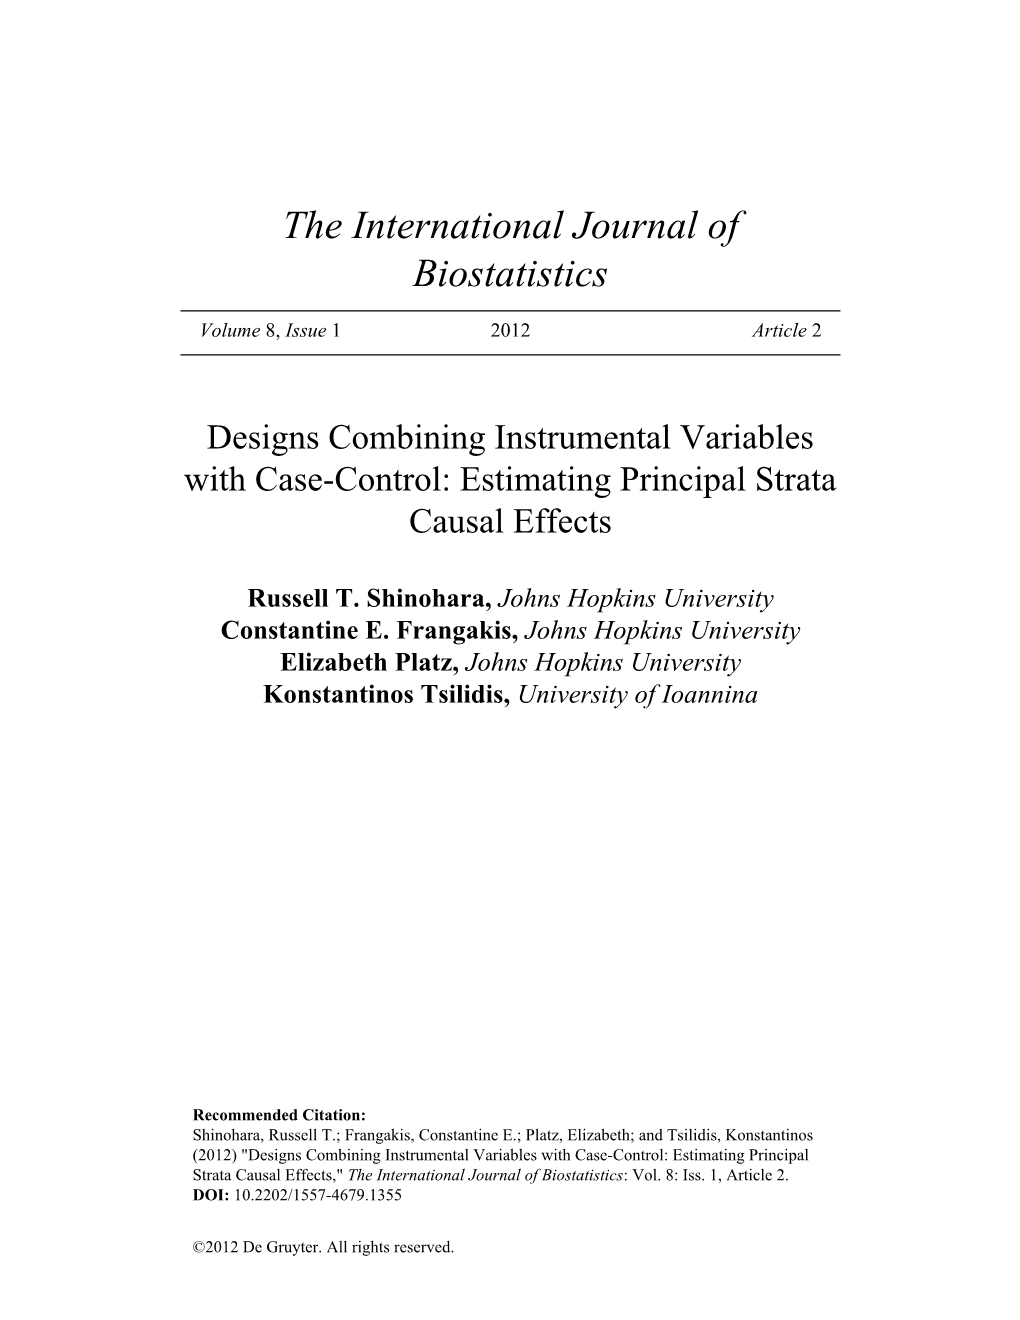 Designs Combining Instrumental Variables with Case-Control: Estimating Principal Strata Causal Effects